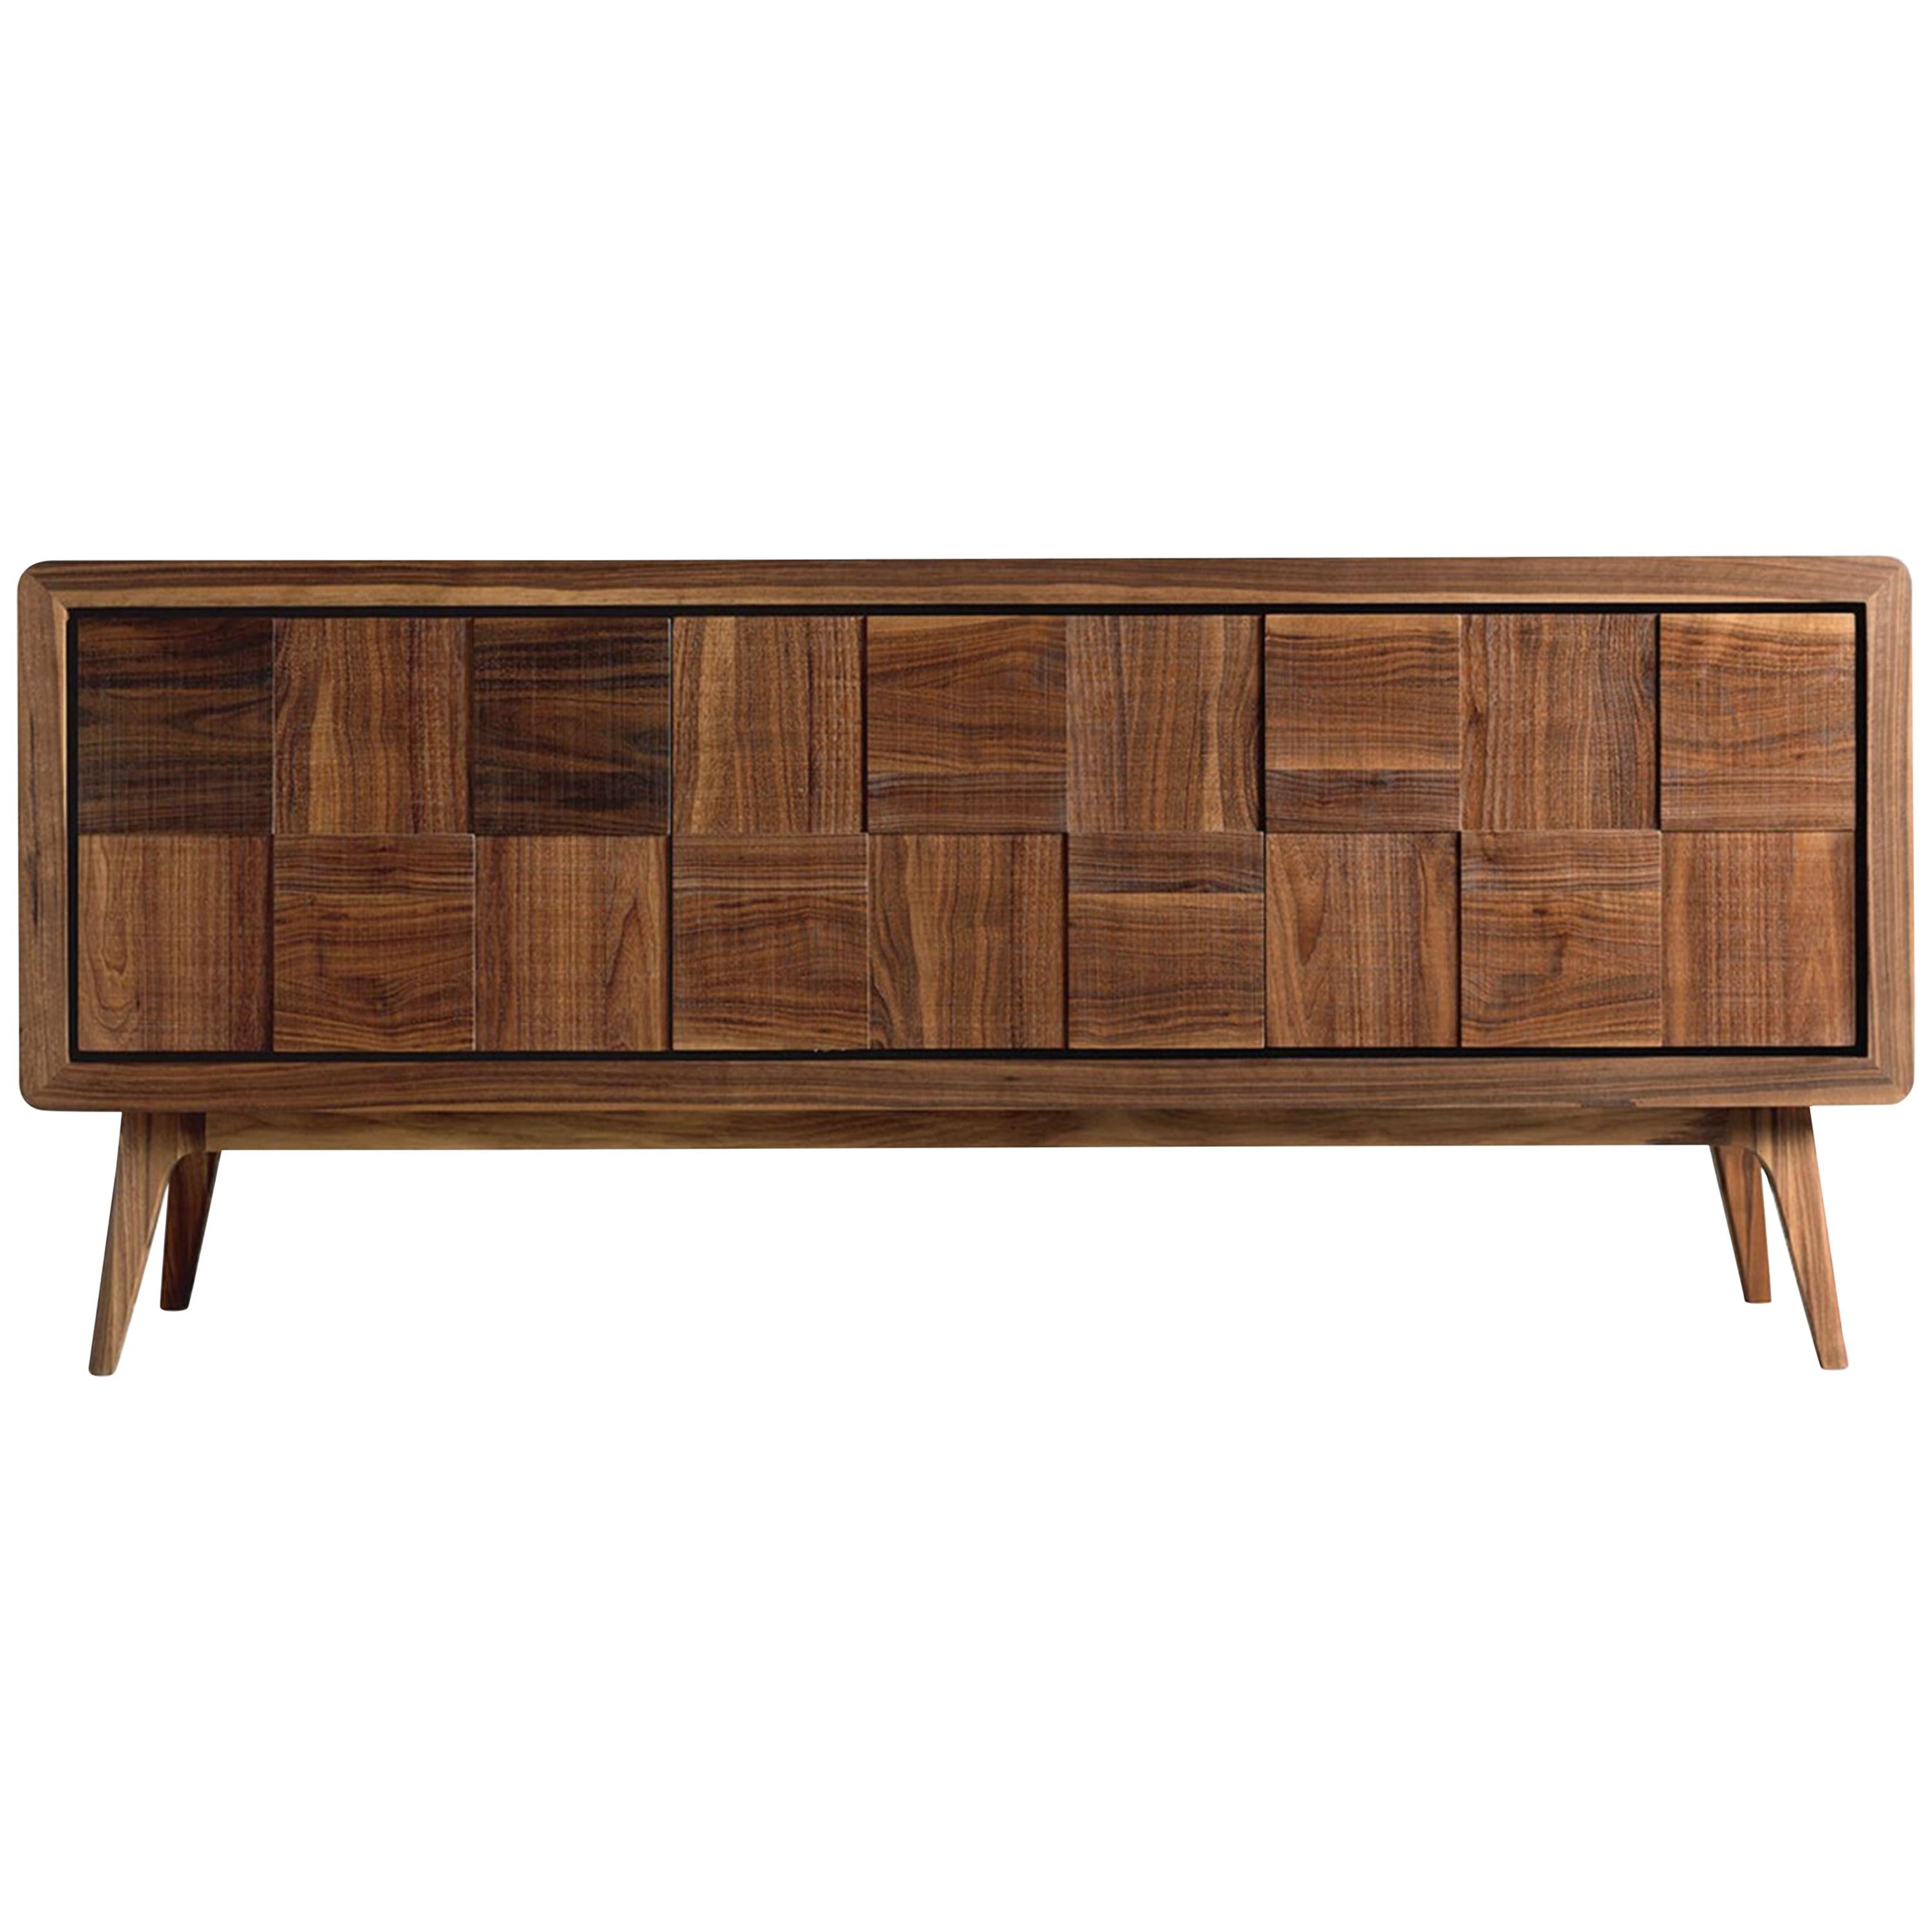 Artes Quadro Solid Wood Sideboard, Walnut Natural Finish, Contemporary